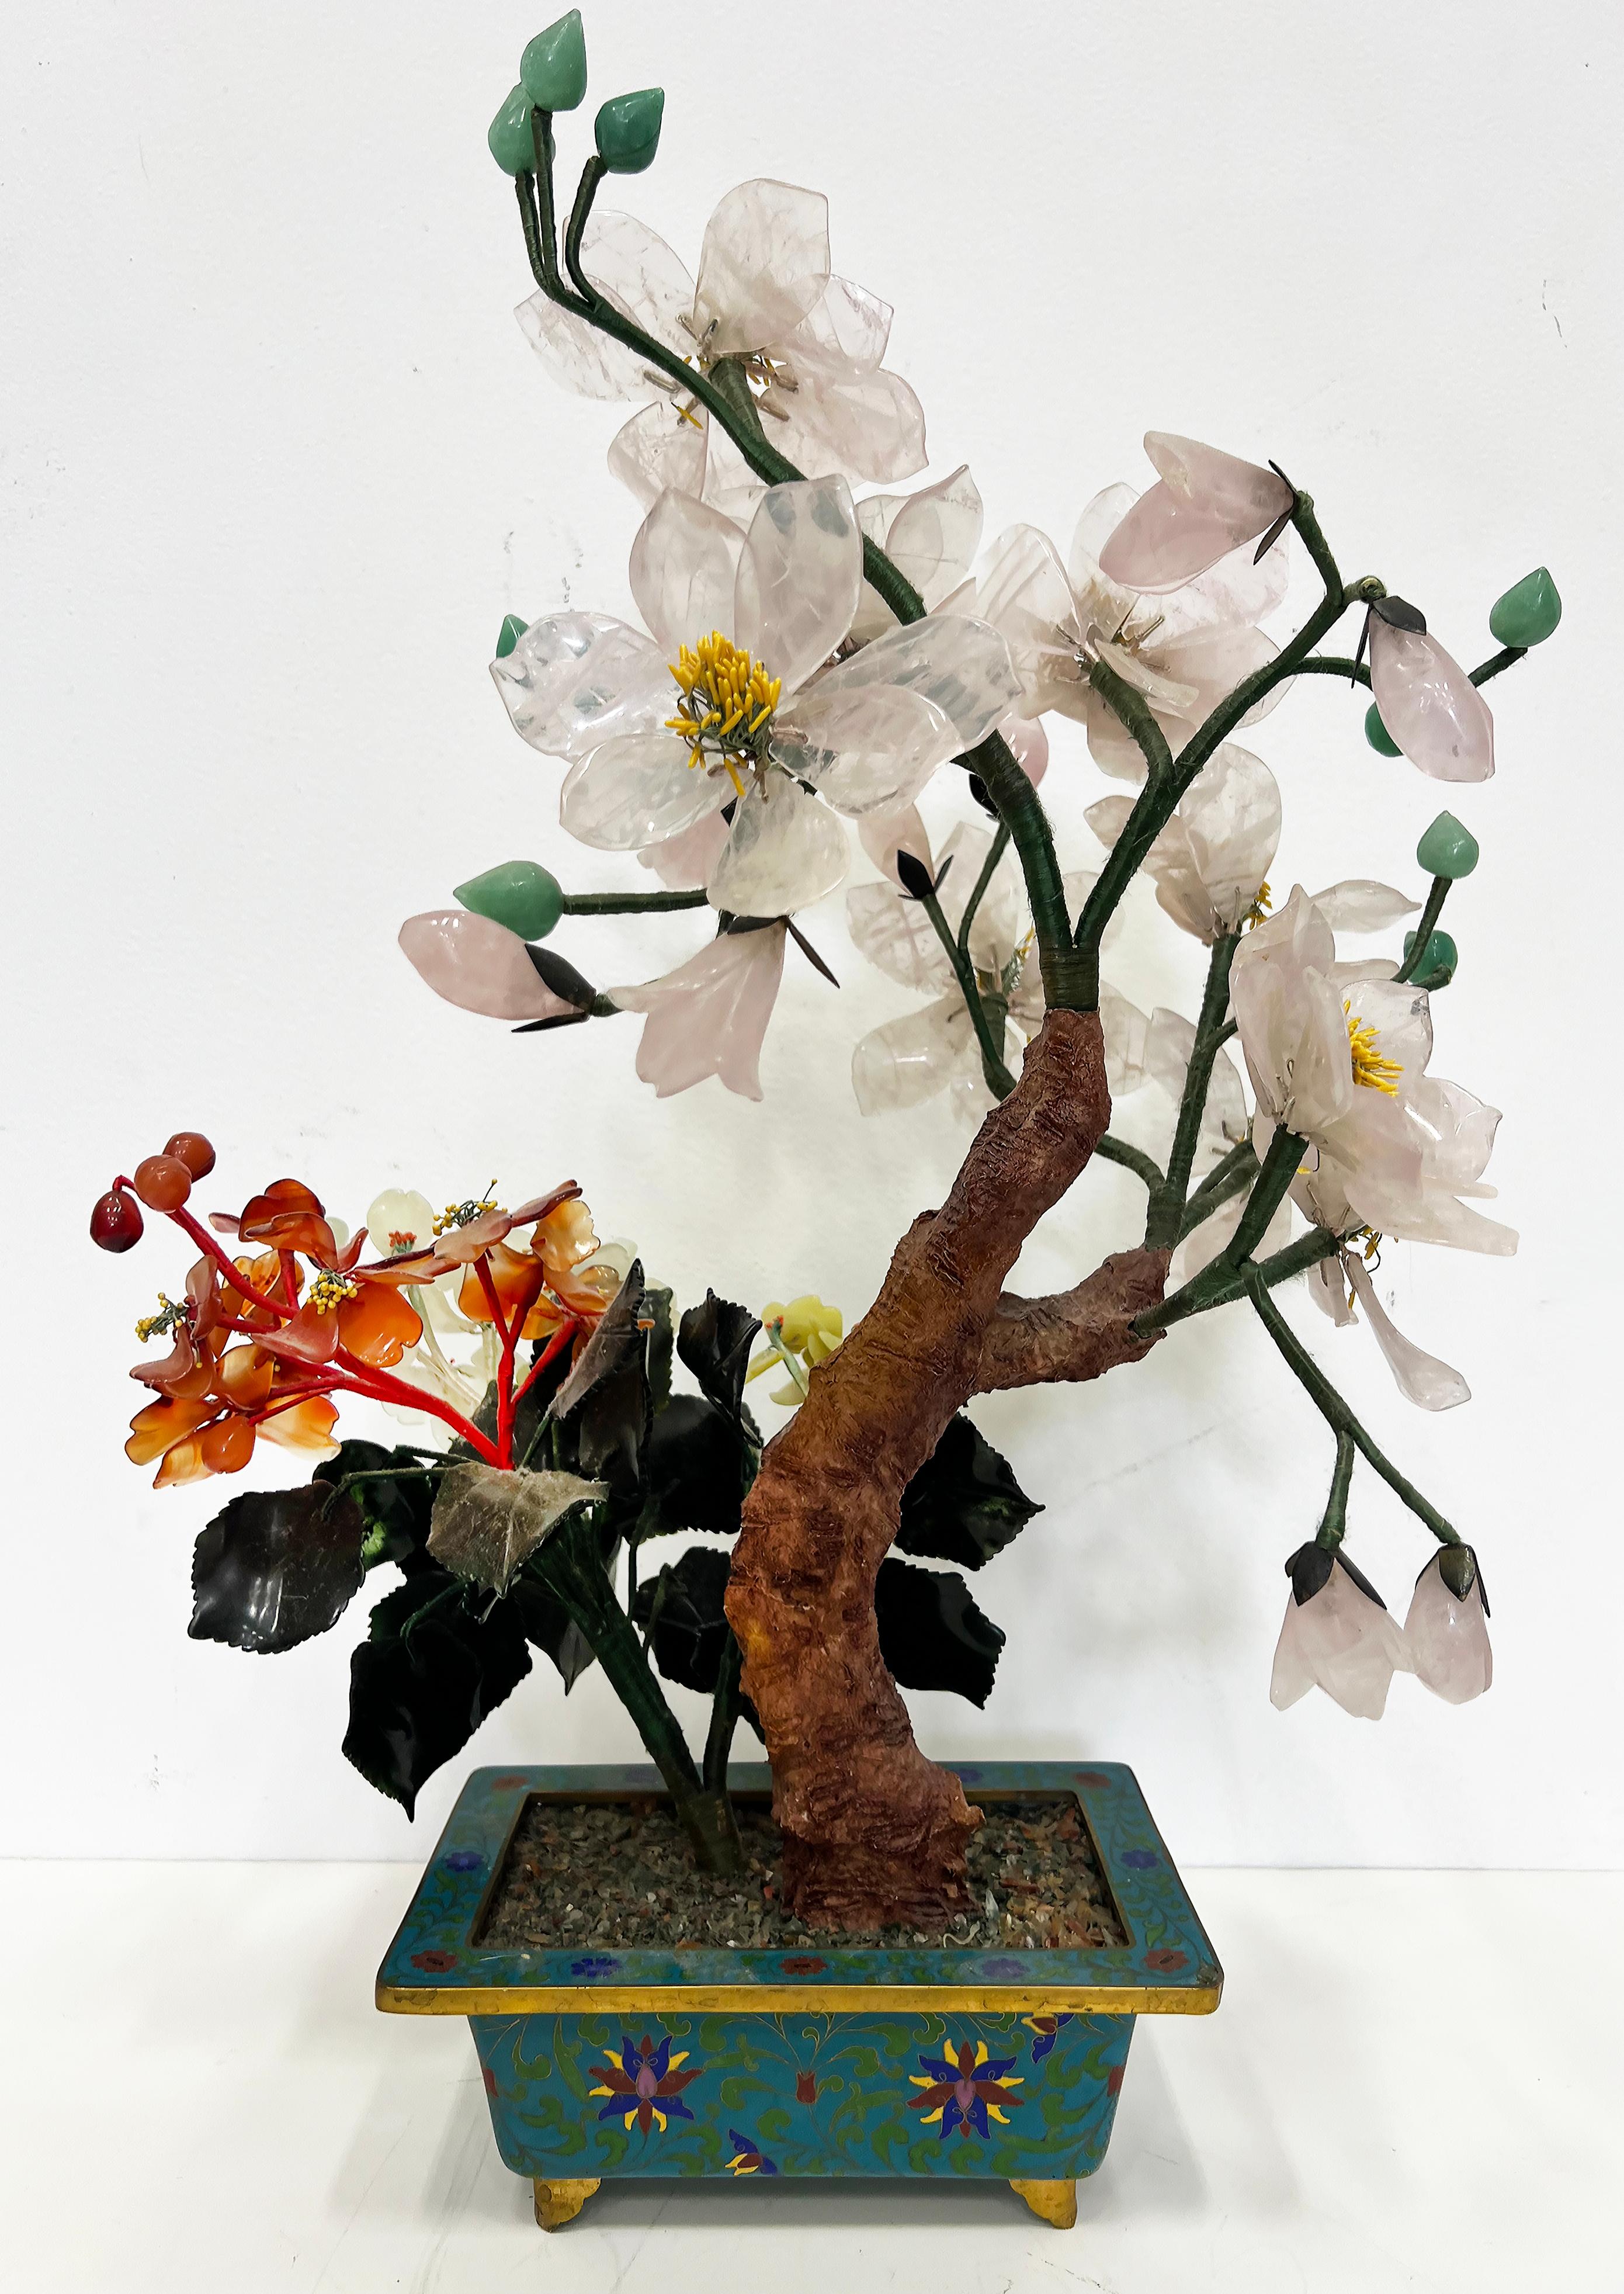 Vintage Chinese Jade Precious Stone Bonsai Tree Sculpture, Cloisonné Planter

Offered for sale is a vintage Chinese Jade and other semi-precious stones Bonsai tree in a gilt planter.  The tree is dense and artistically created with many different